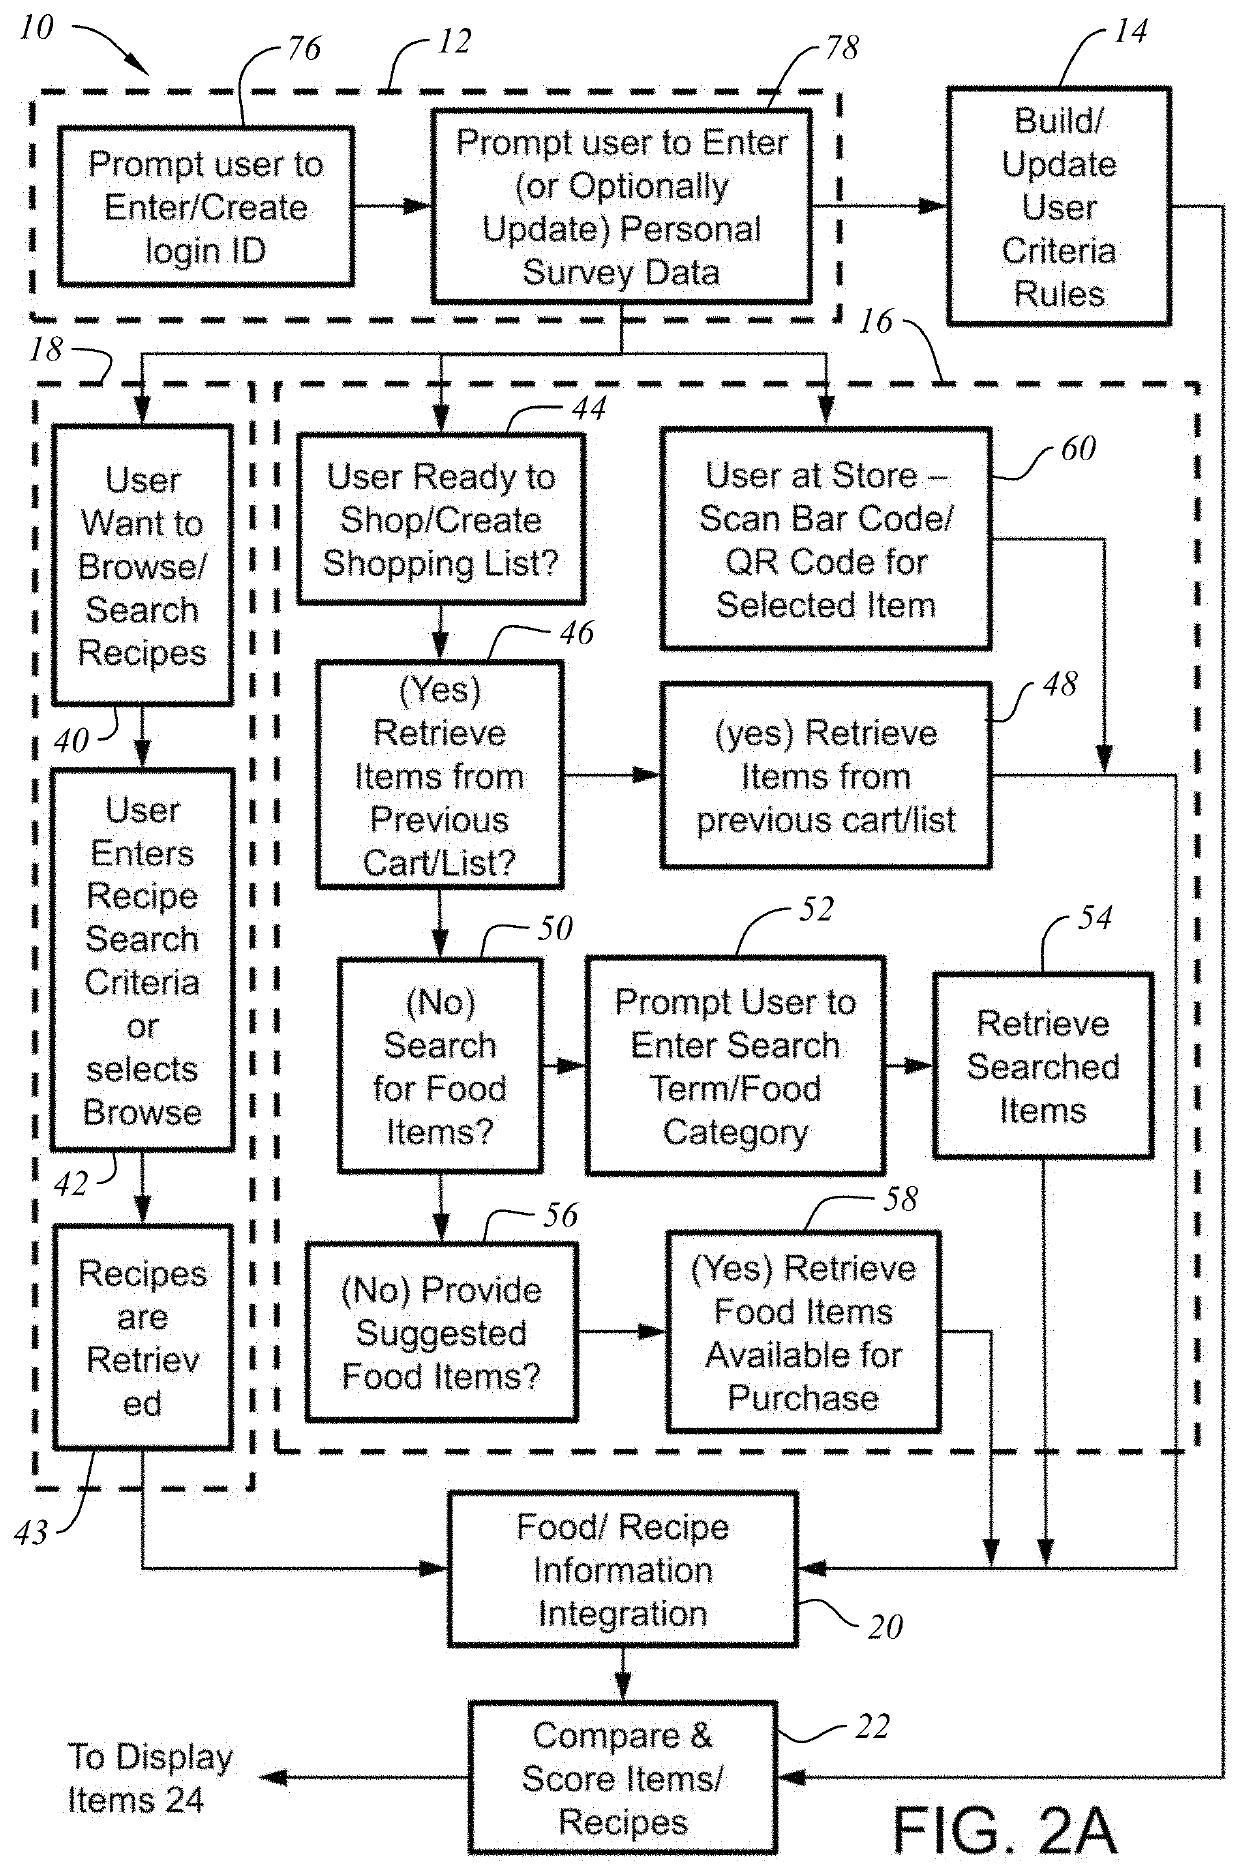 System and Method for Improving Food Selections